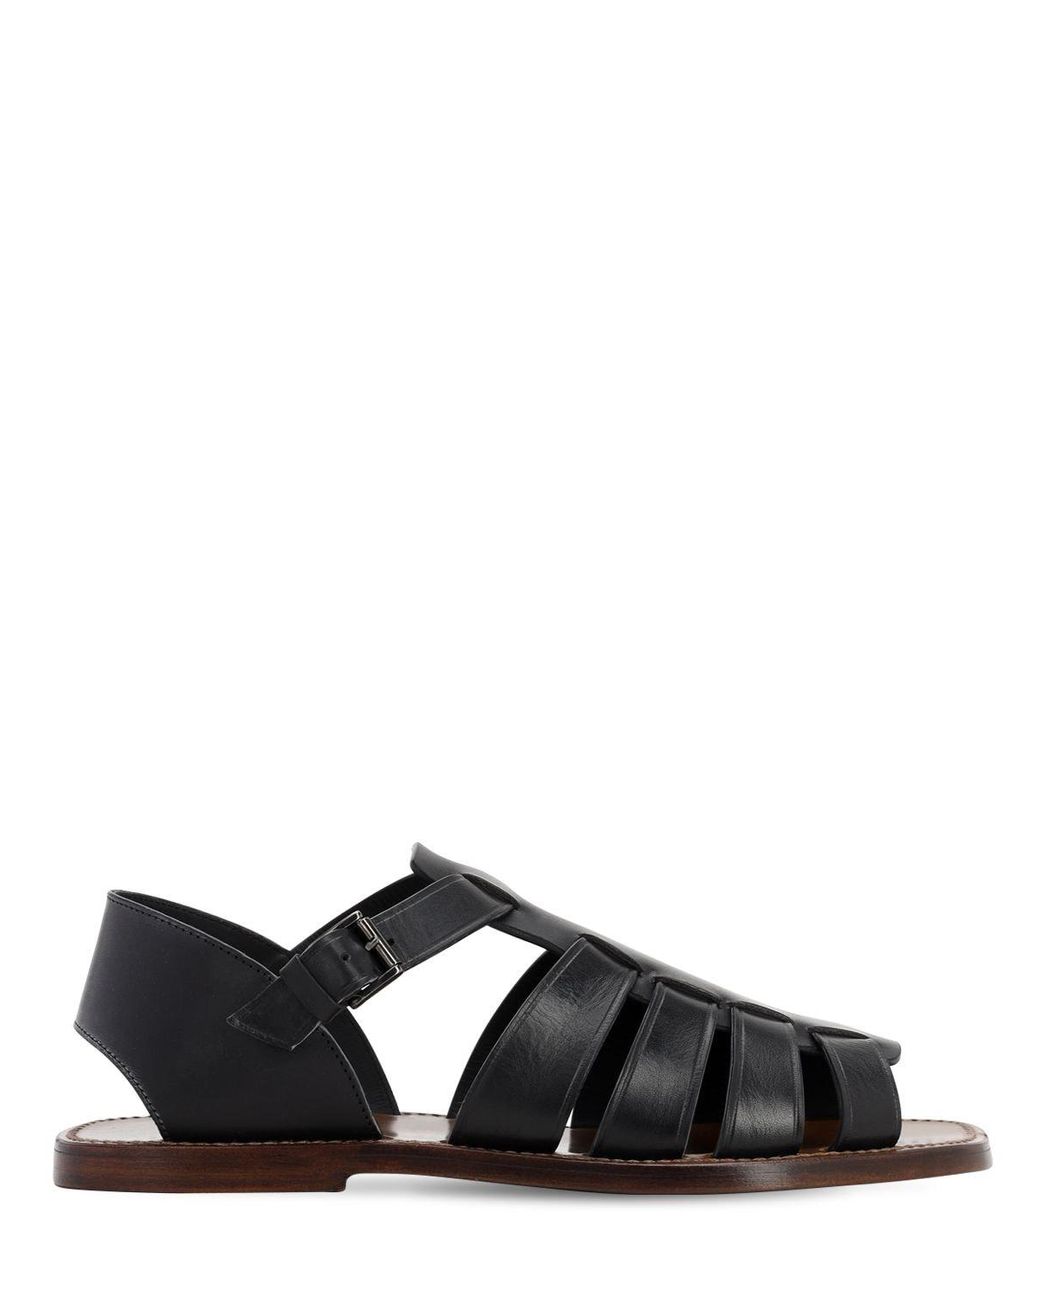 Silvano Sassetti 15mm Leather Sandals in Black for Men - Save 36% - Lyst